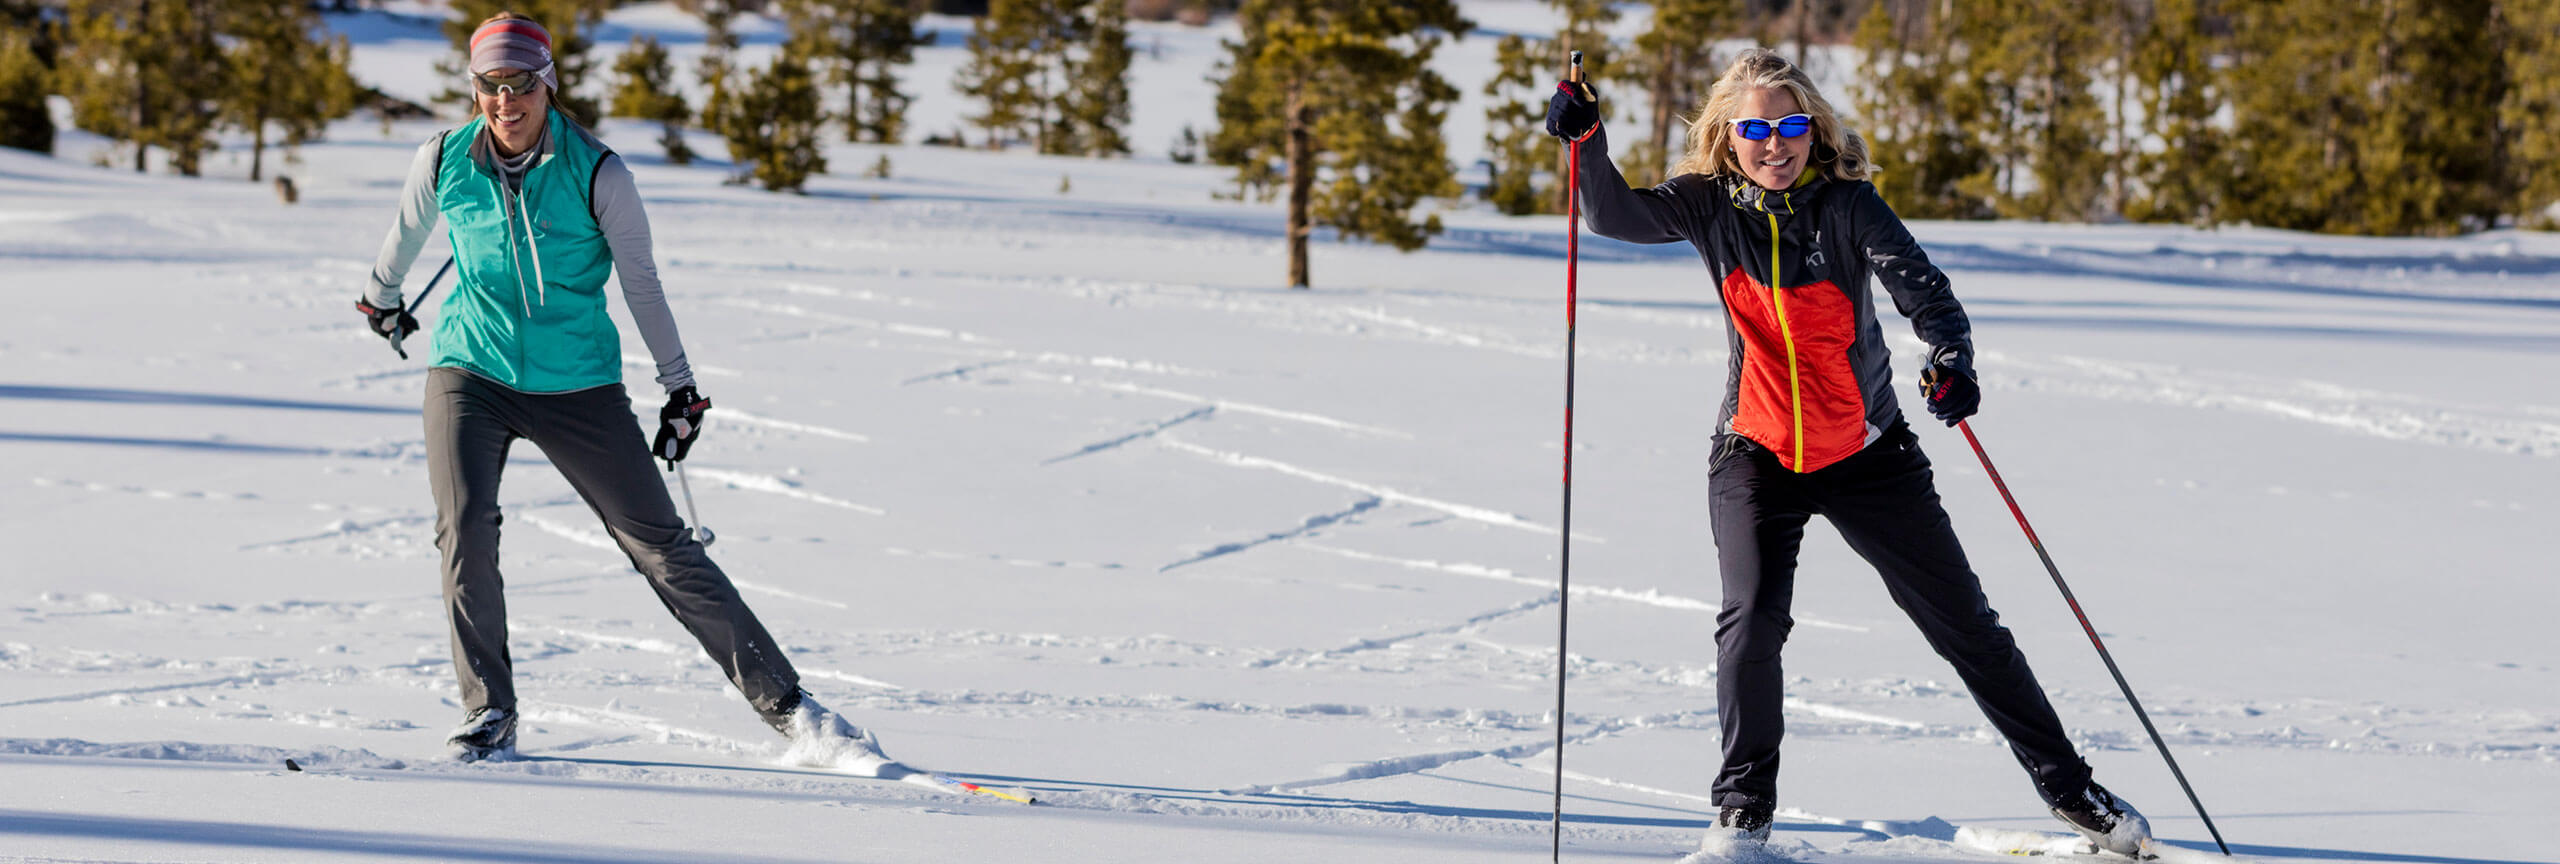 Two women skate skiing at the Frisco Nordic Center.